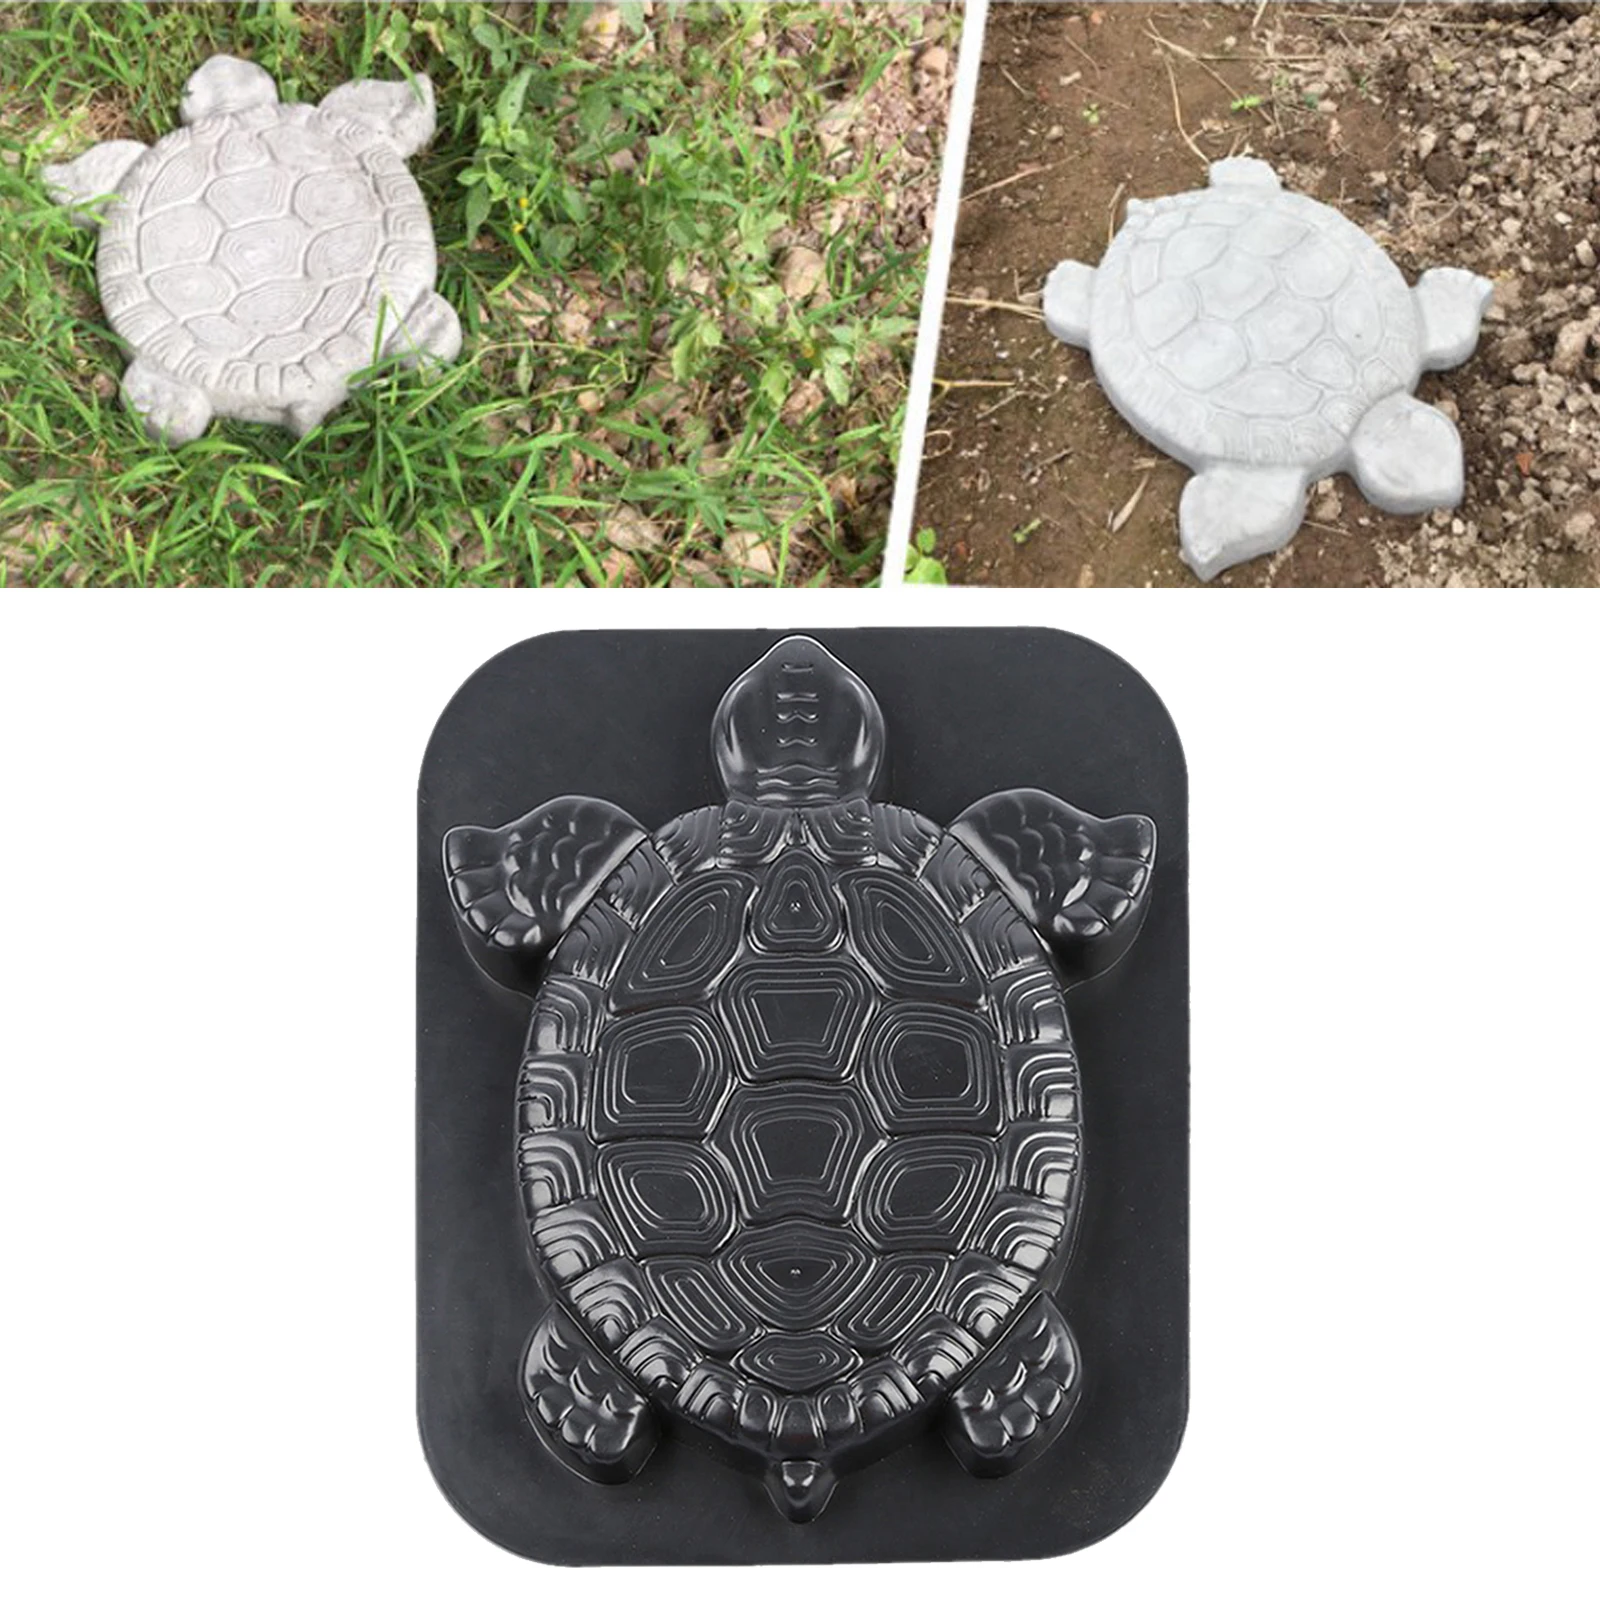 Manually Paving Cement Brick Molds Tortoise Shaped Path Maker Mold Garden Path Stone Molds Concrete Mould